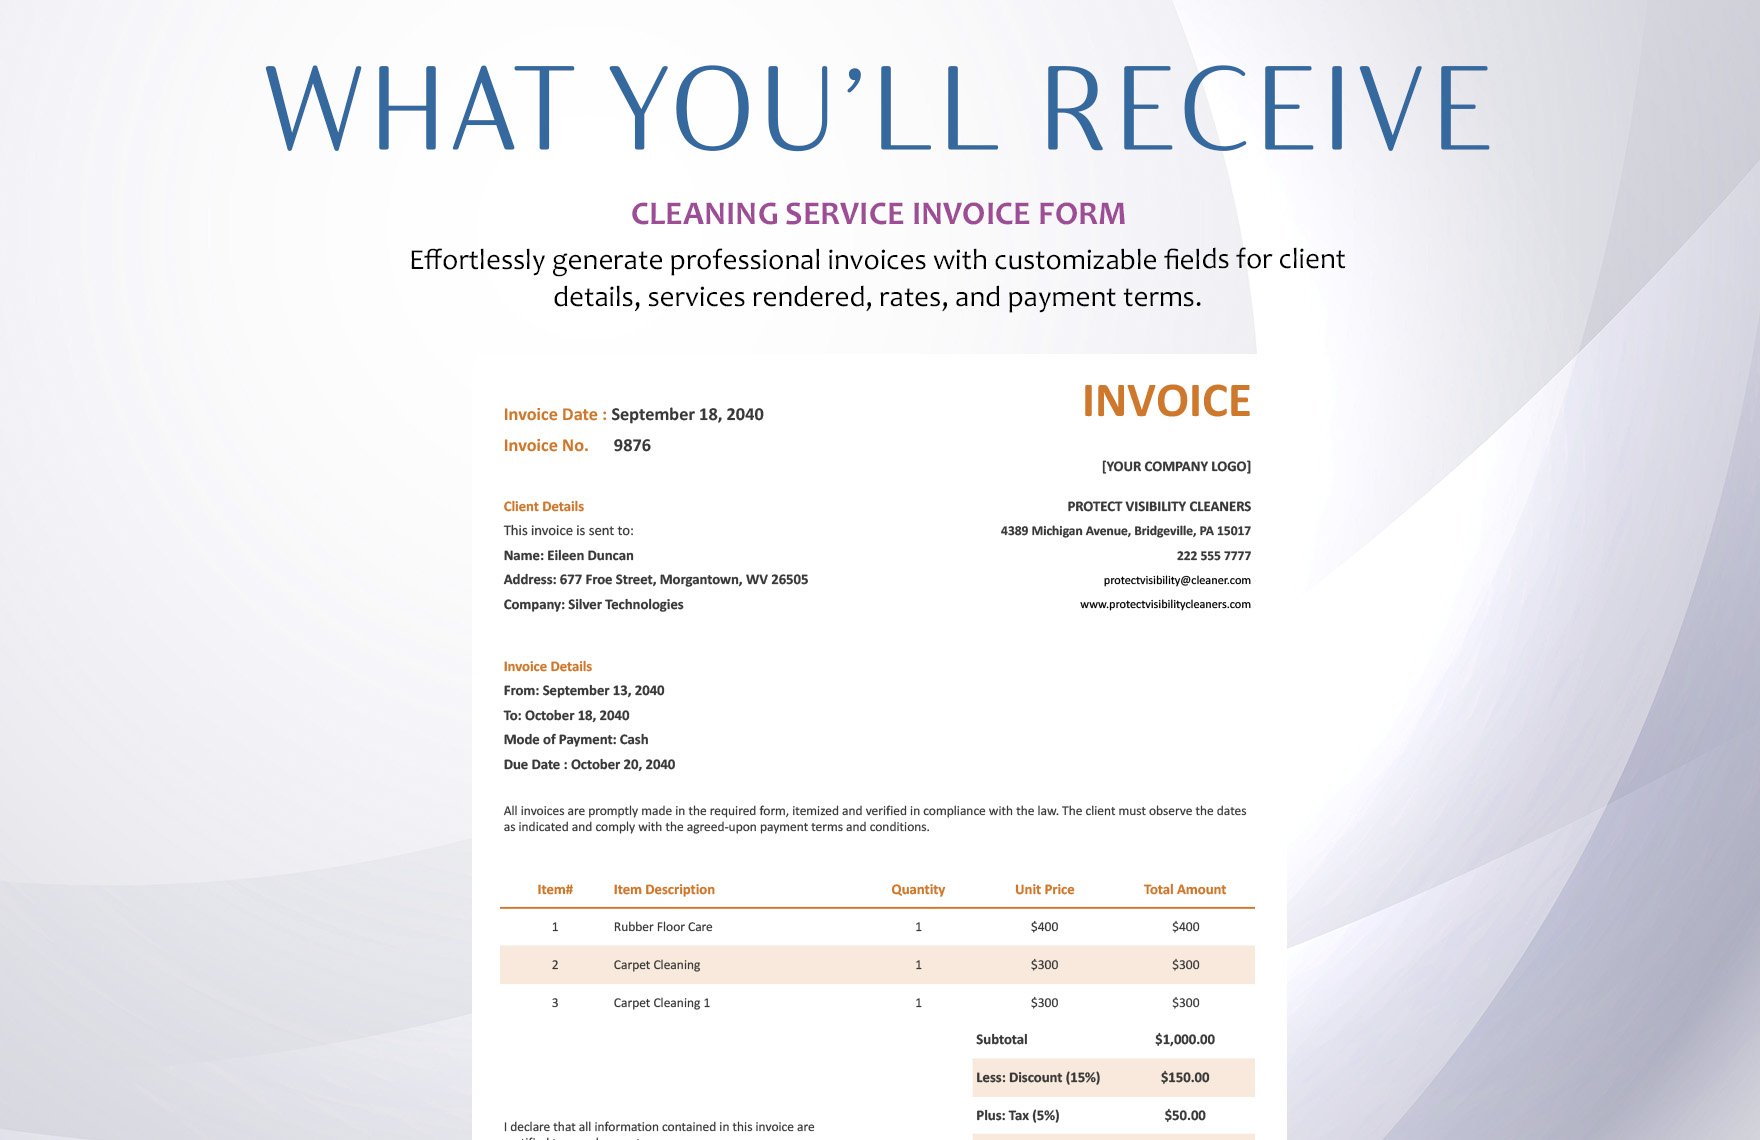 Cleaning Service Invoice Form Template